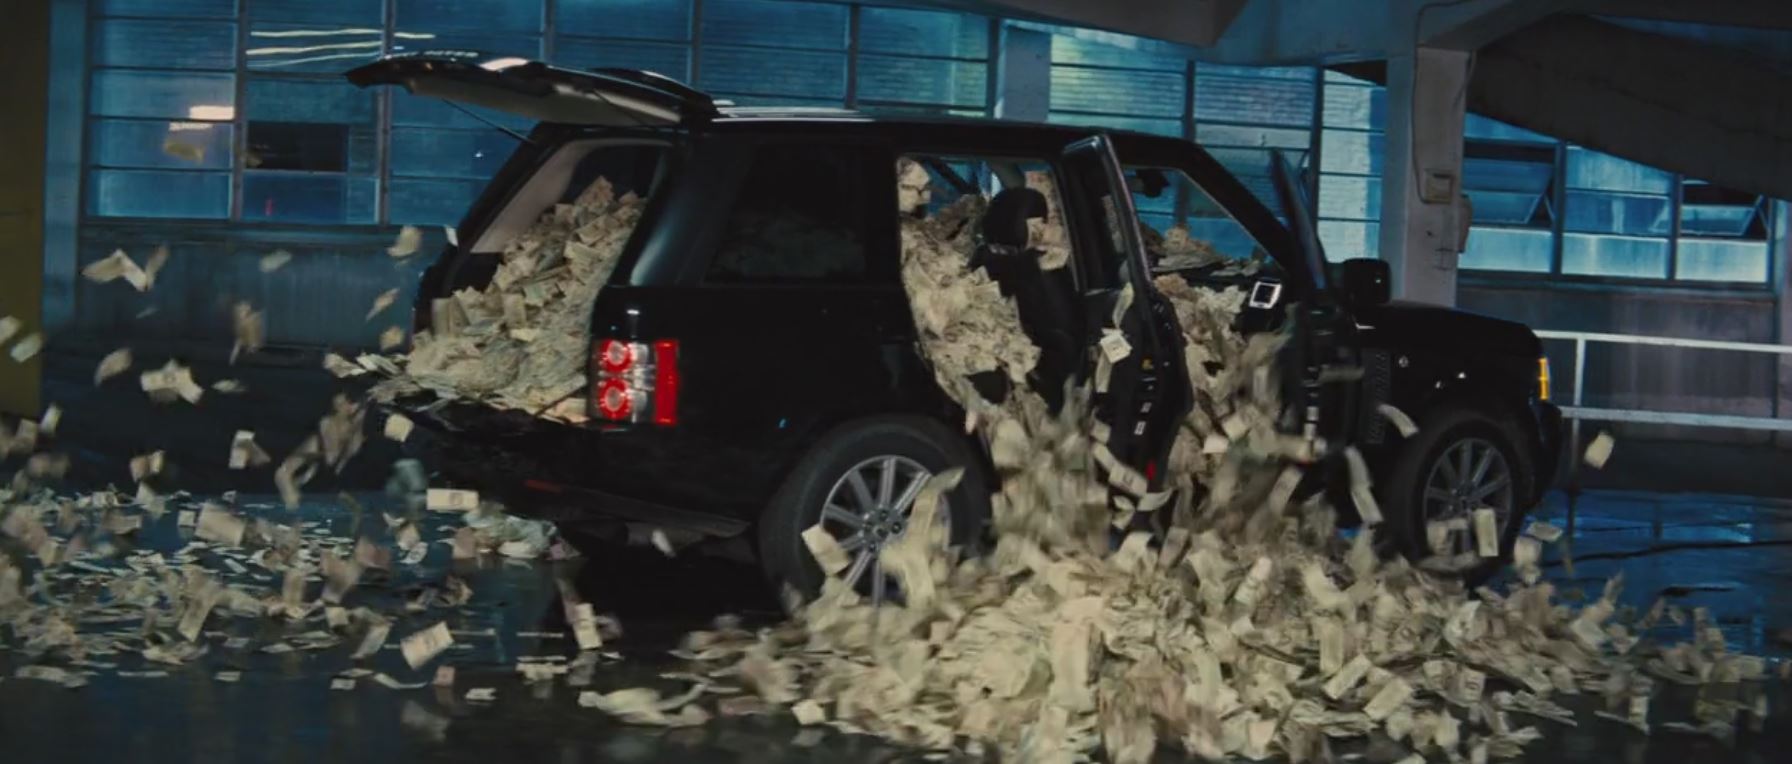 SUV overflowing with money